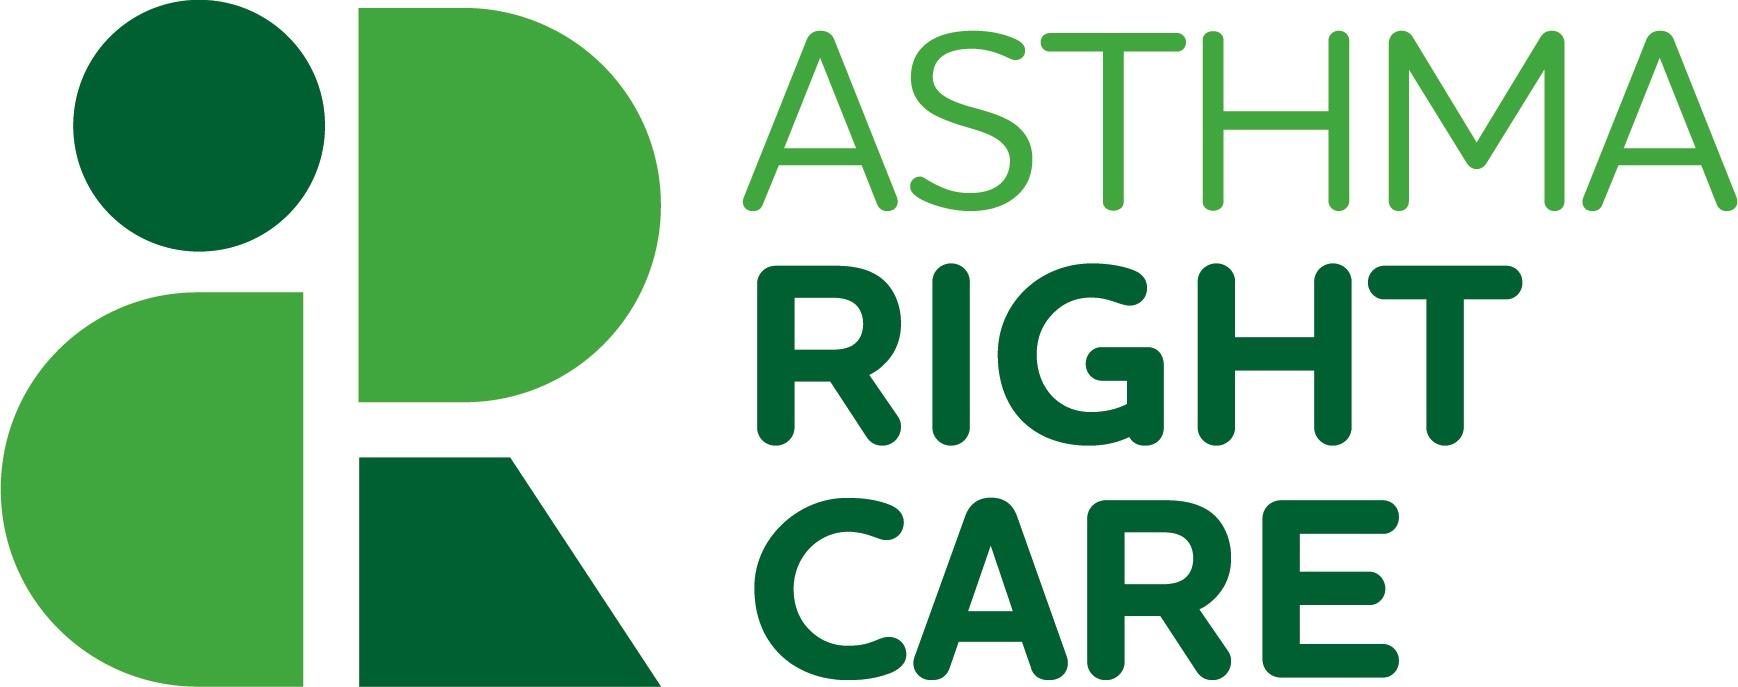 Asthma Right Care (ARC)